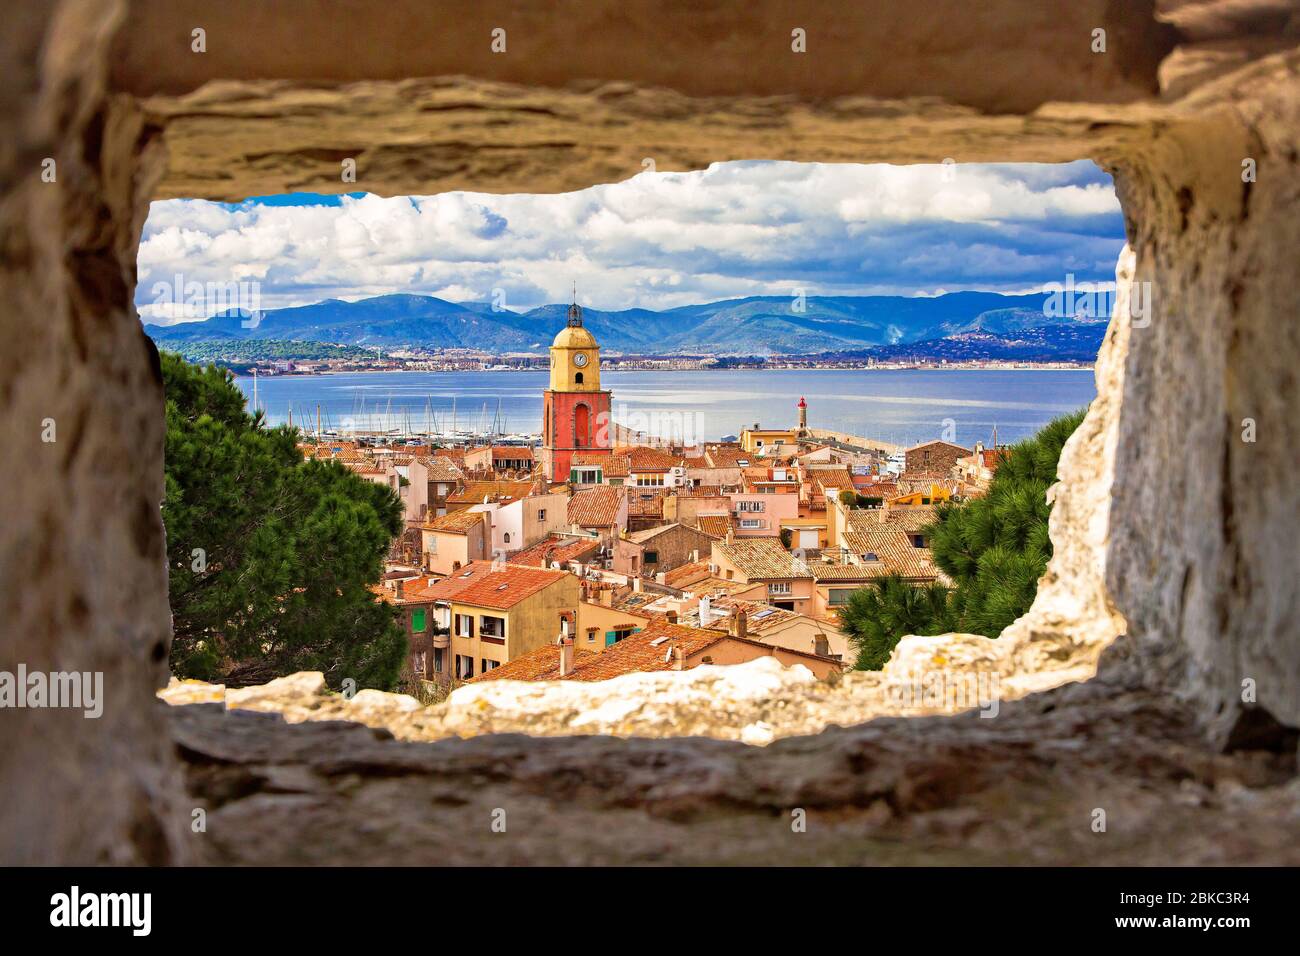 Saint Tropez village church tower and old rooftops view through stone window, famous tourist destination on Cote d Azur, Alpes-Maritimes department in Stock Photo